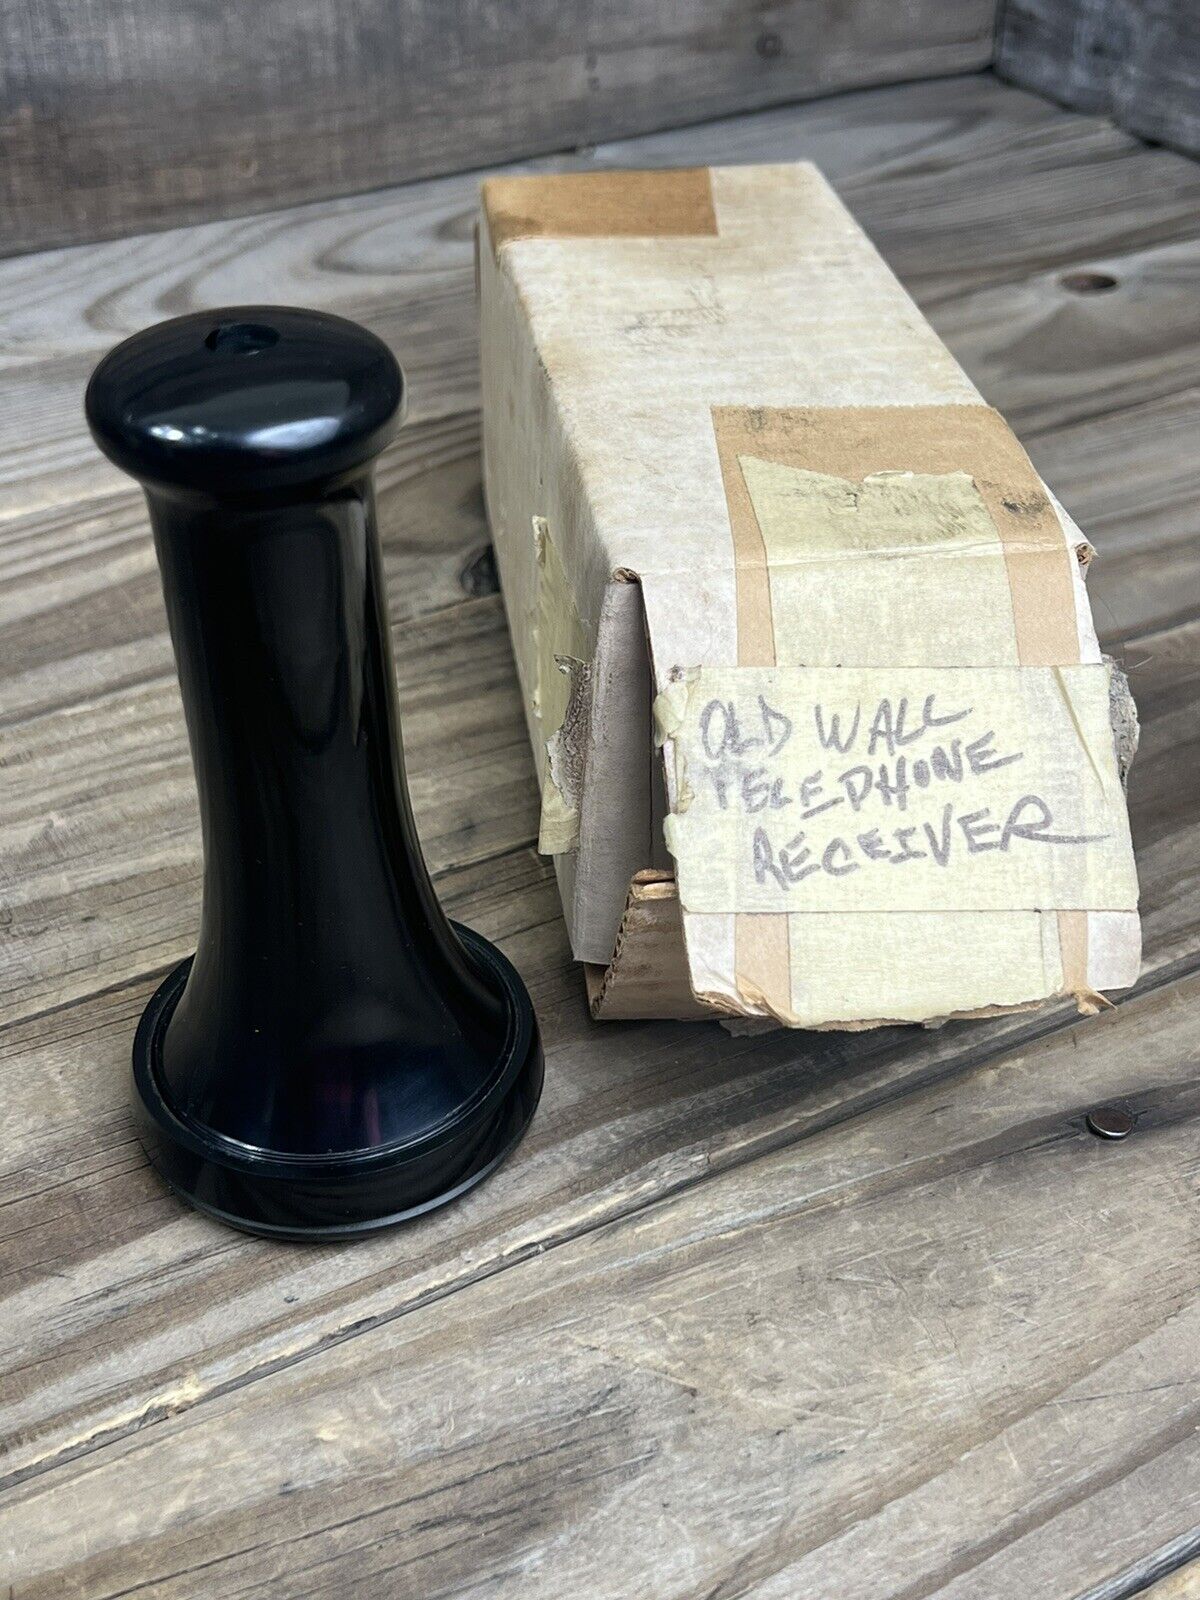 NOS Antique Candlestick Telephone Handset Receiver Shell Ear Piece Black in Box